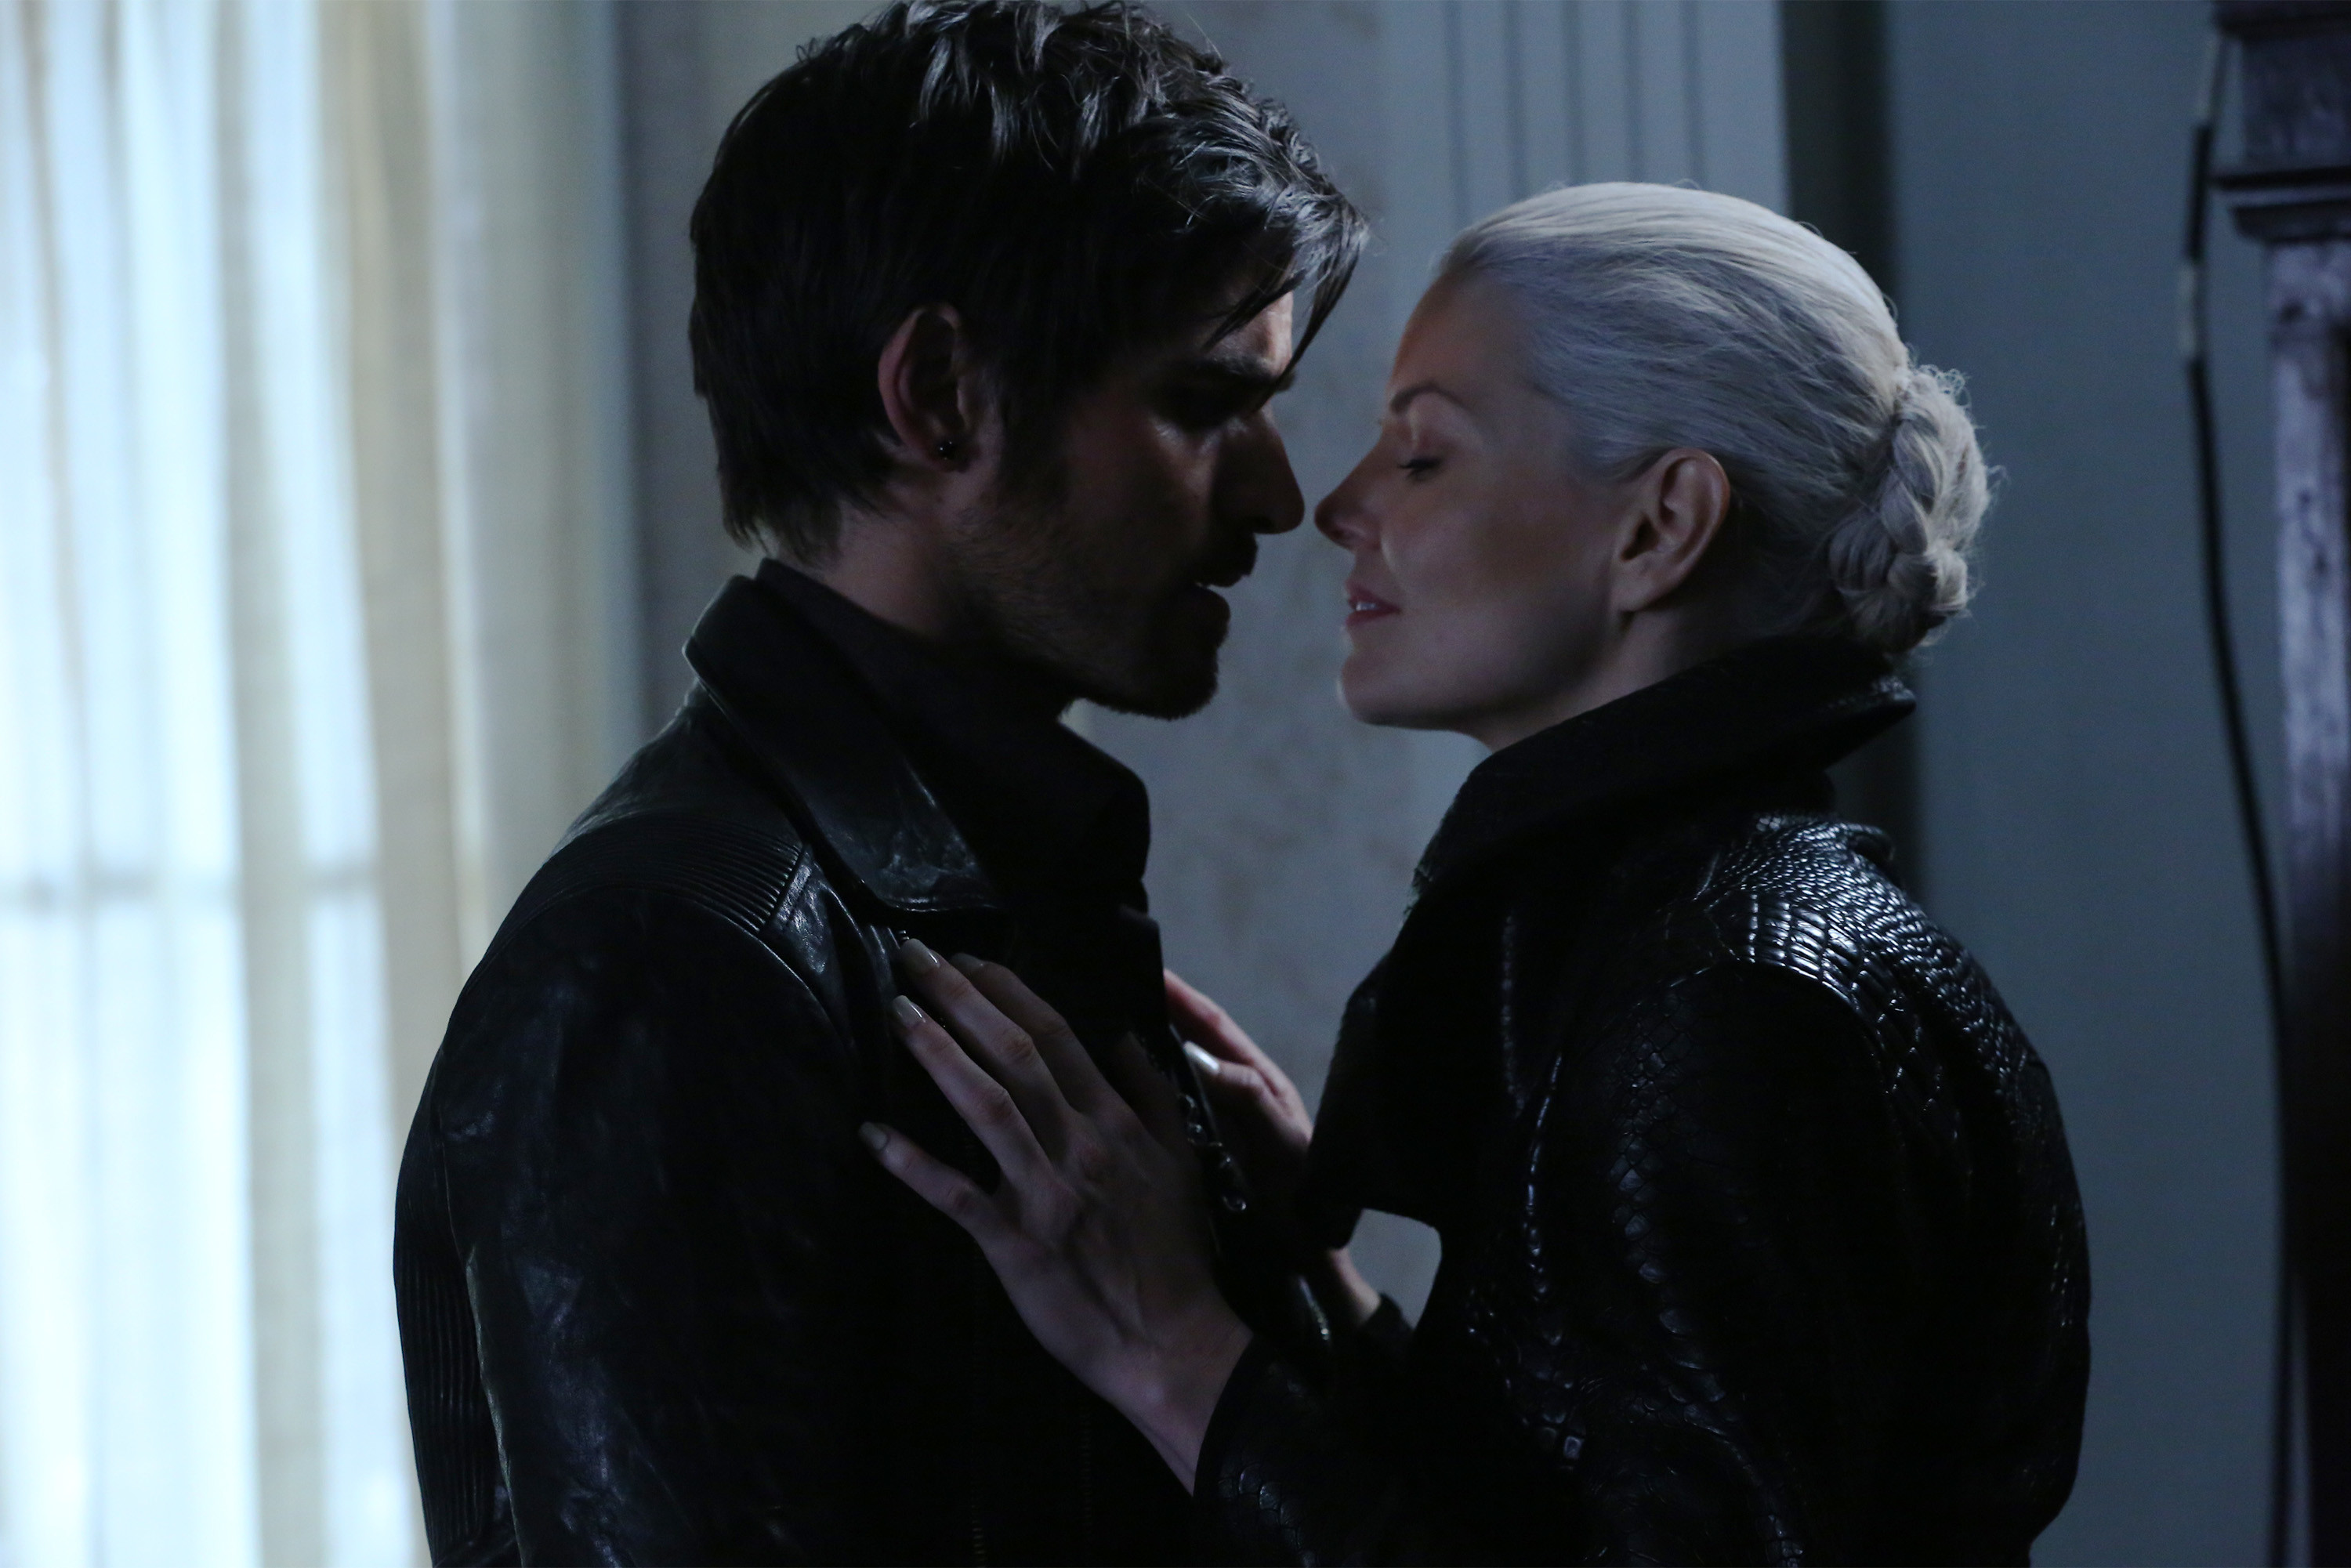 3000x2001 Colin O'Donoghue.COM Â» Blog Archive EXCLUSIVE: 'Once Upon a Time' Bosses  Talk 'Kickass' Adventures and What's Ahead for Your Favorite Pairings!